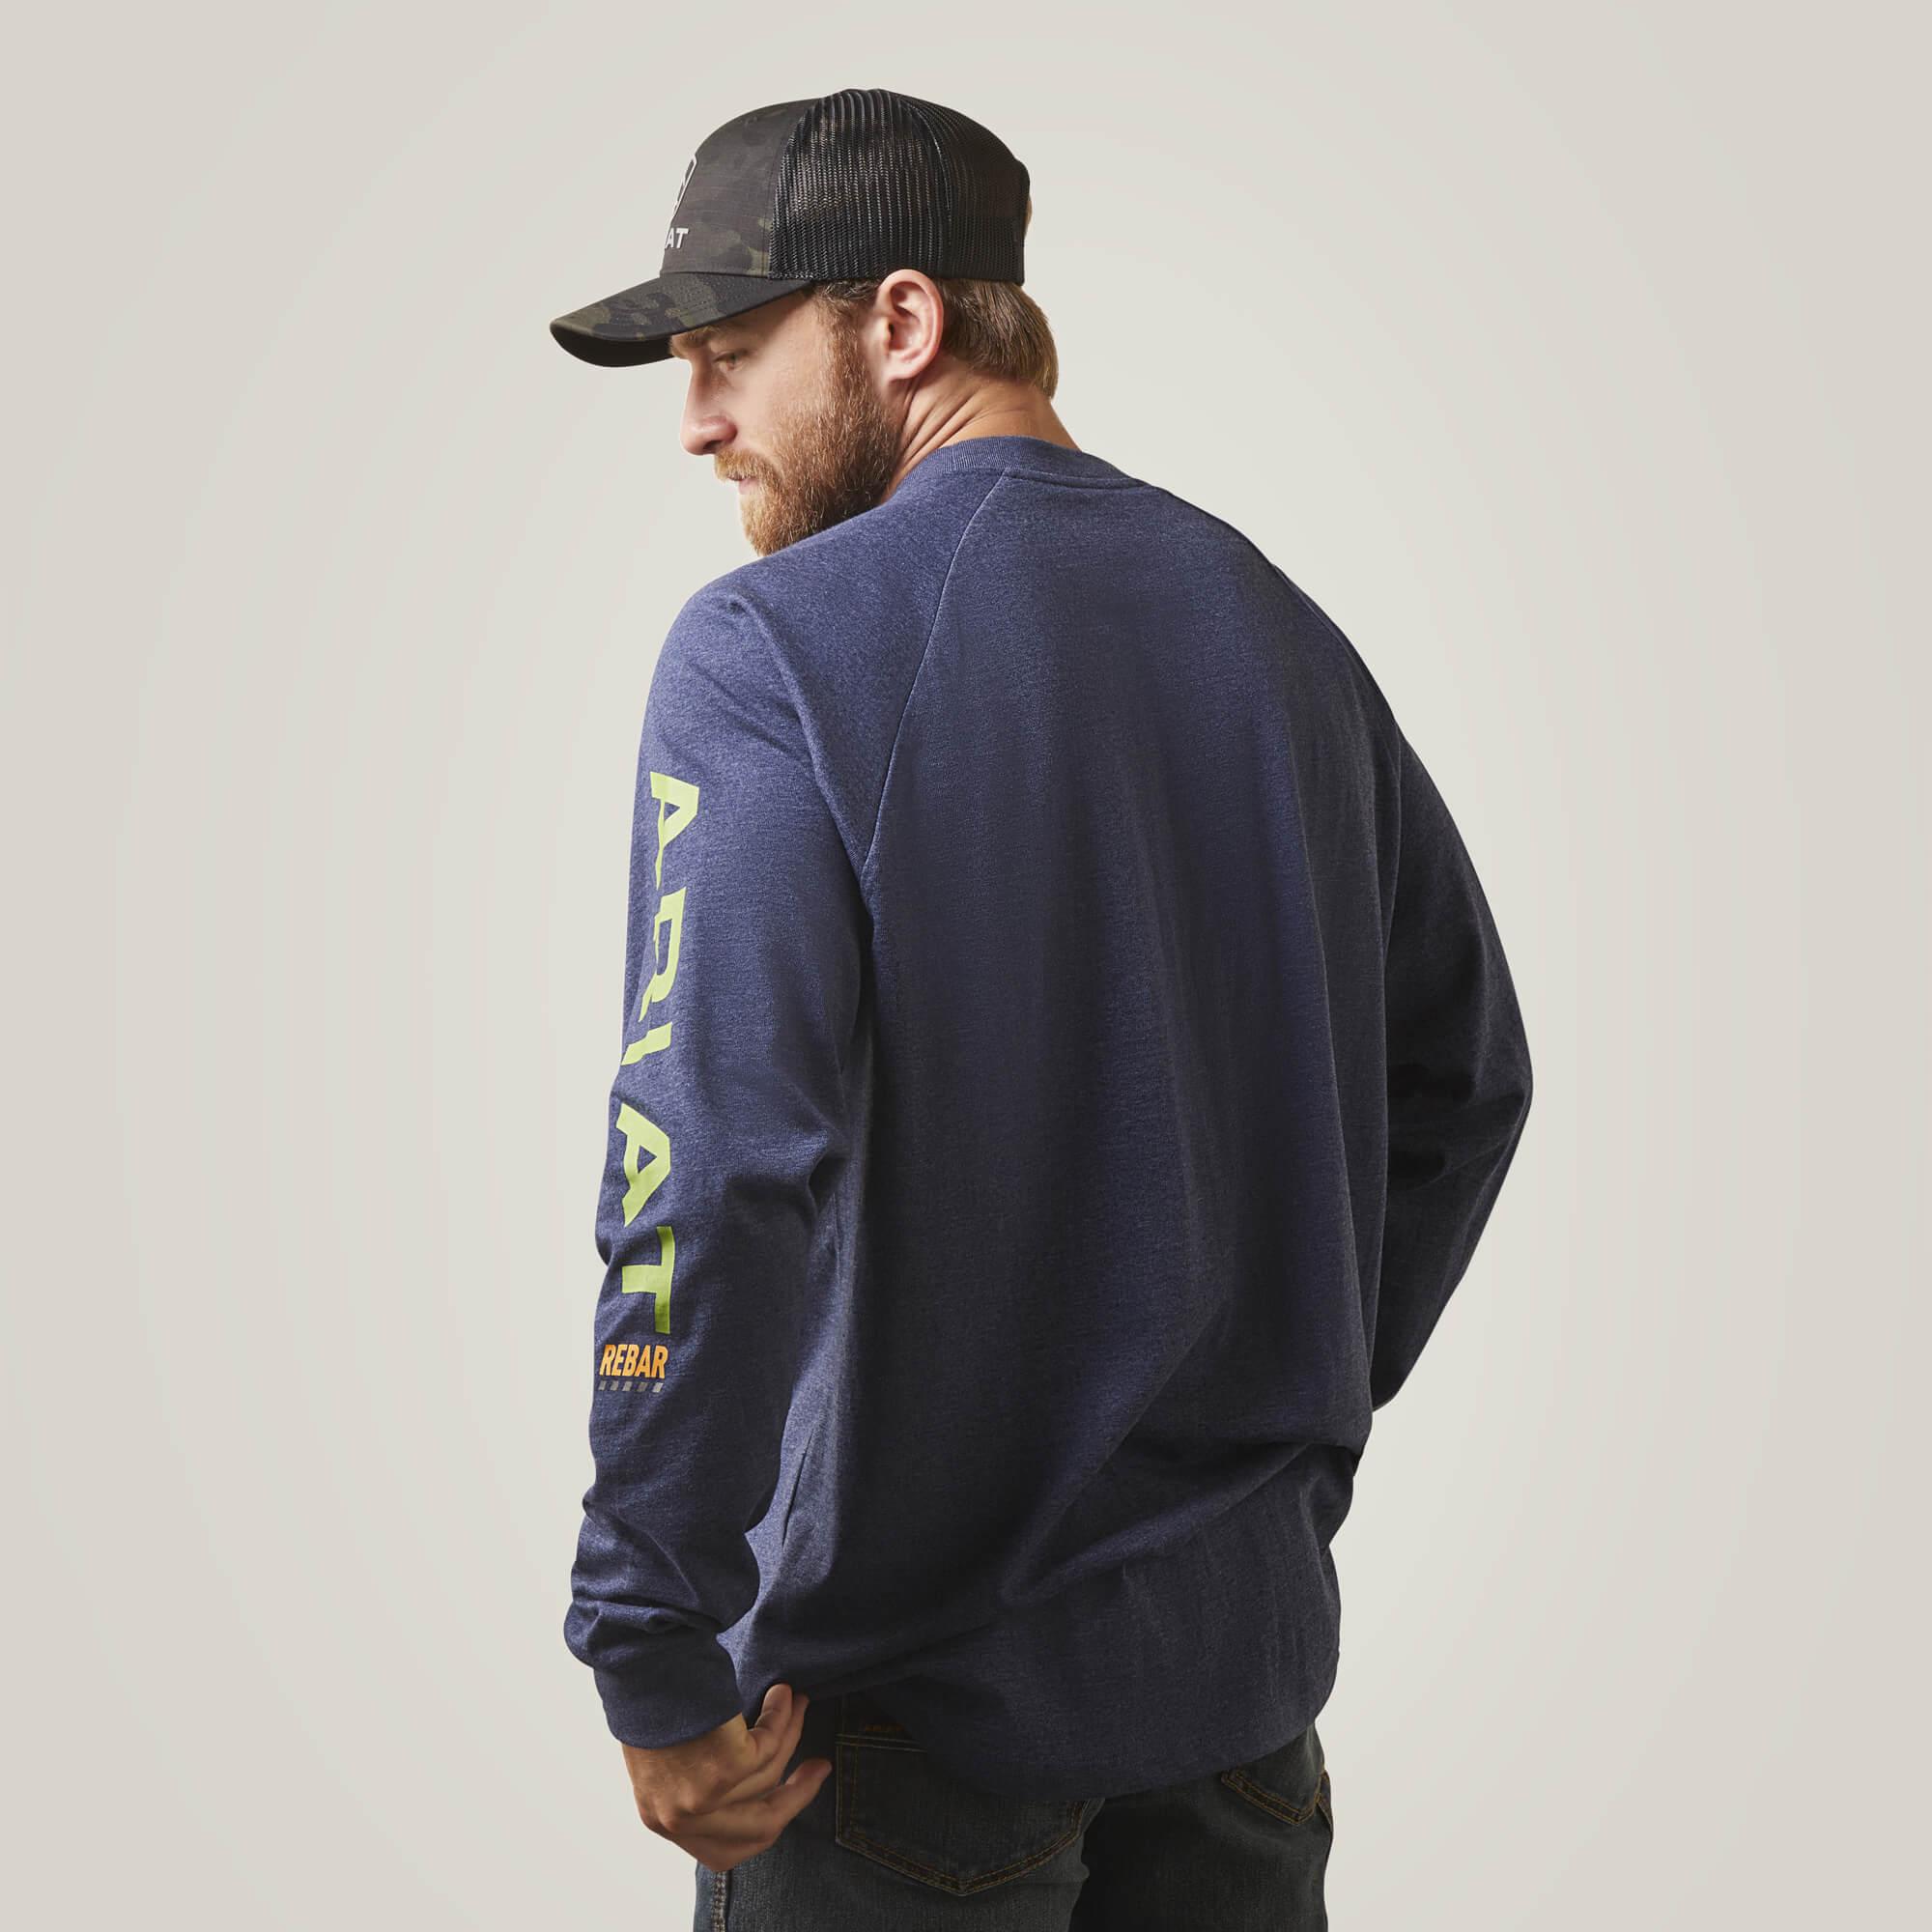 Rebar Cotton Strong Graphic - Navy Heather - Purpose-Built / Home of the Trades